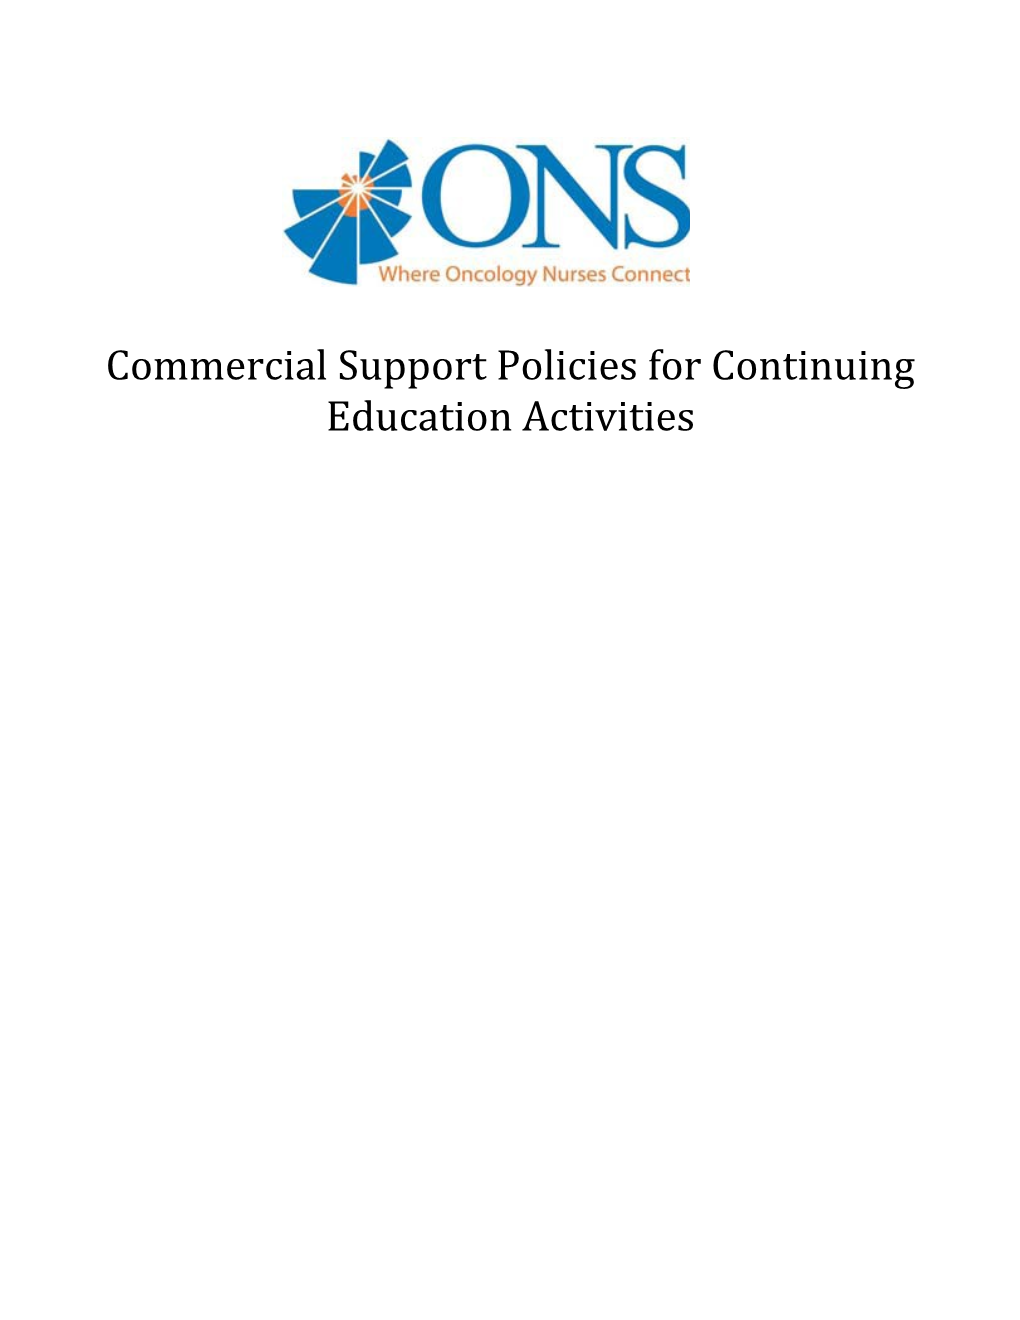 Commercial Support Policies for Continuing Education Activities